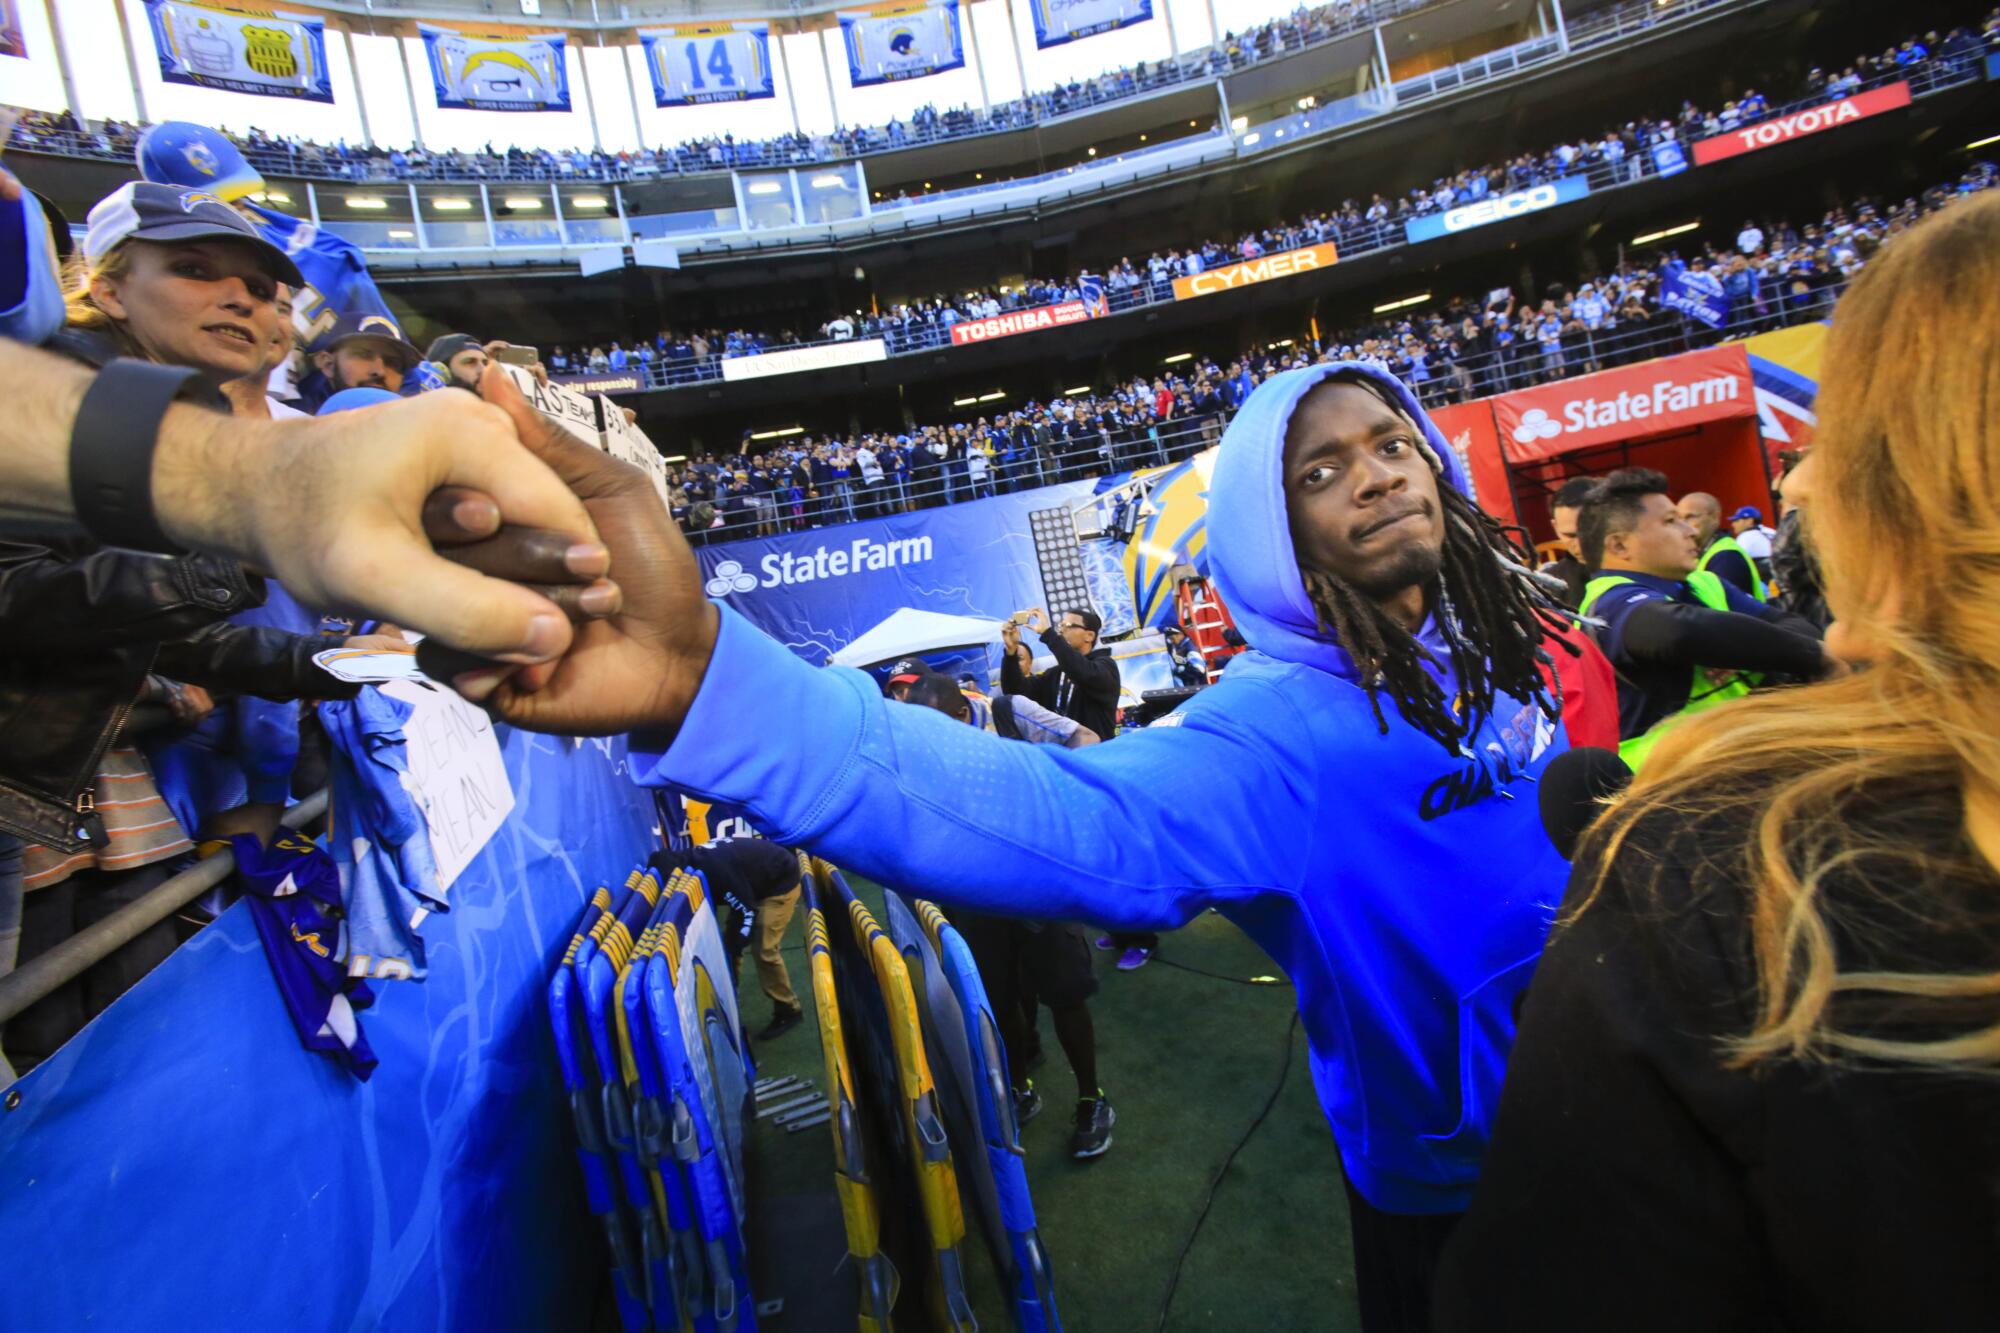 Chargers running back Melvin Gordon shakes hands with a fan at the end of the game.